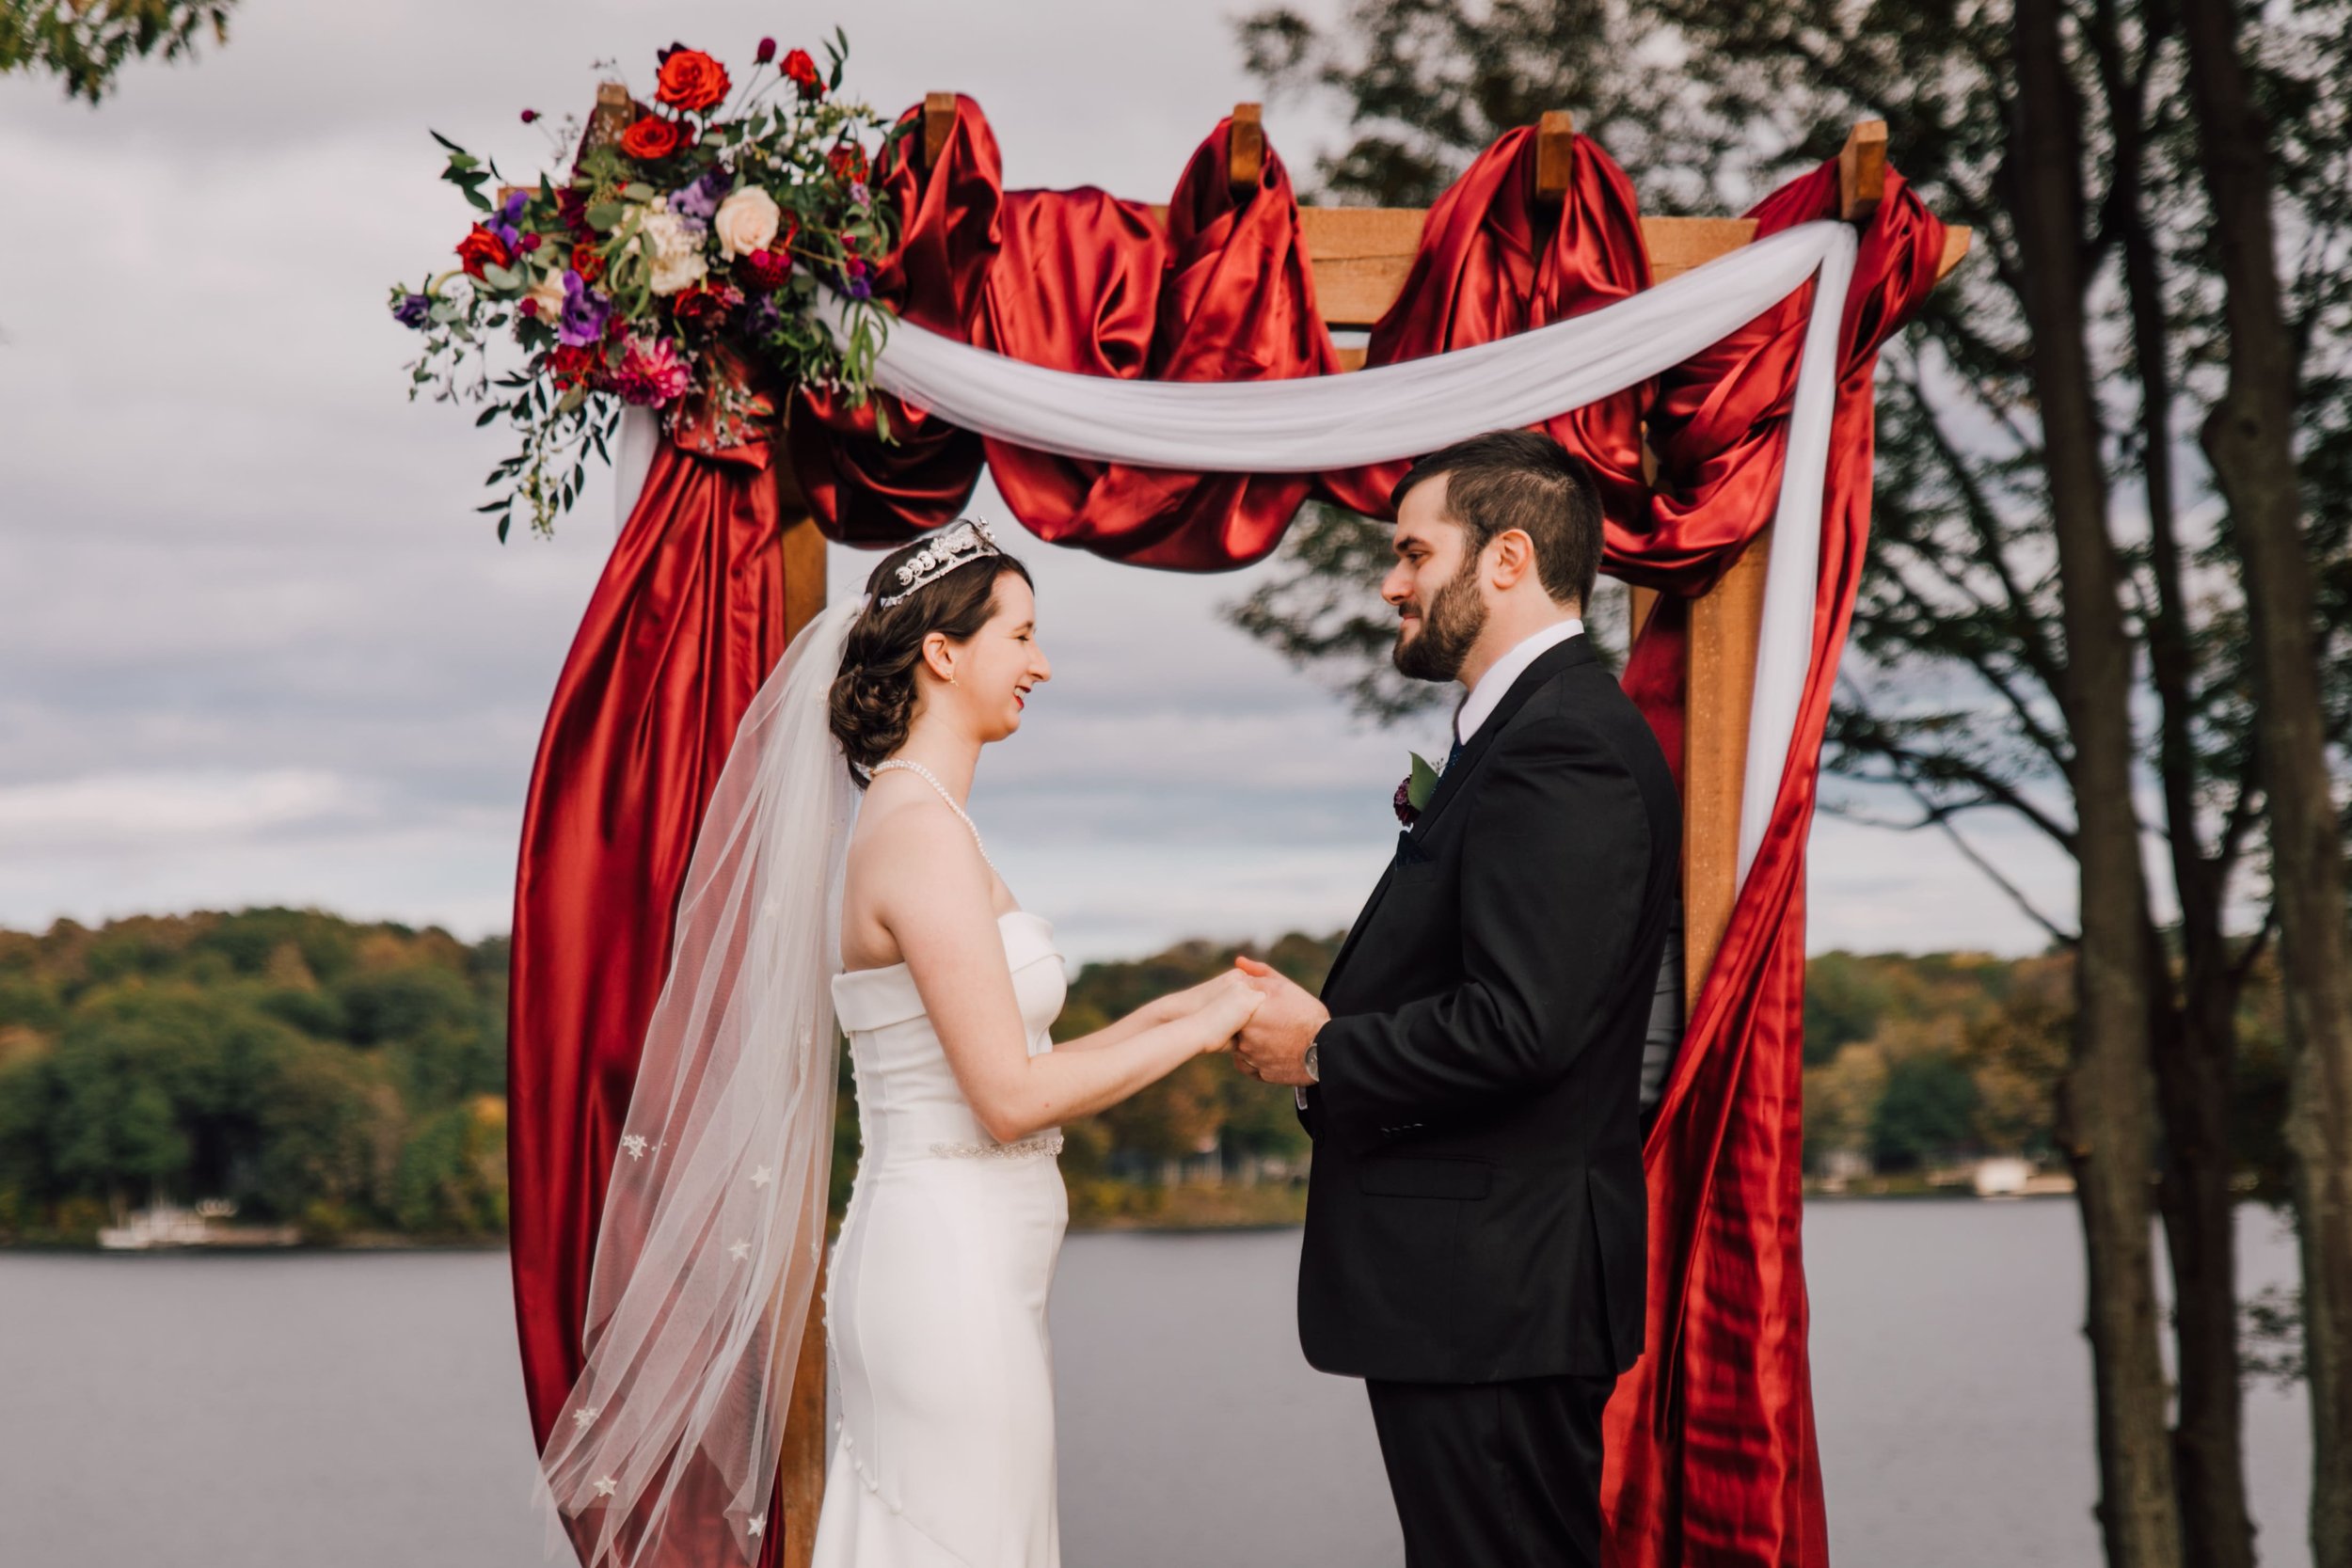  the bride and groom hold hands and smile at each other during their outdoor lake ontario wedding in front of a wedding arbor with red silks and florals 